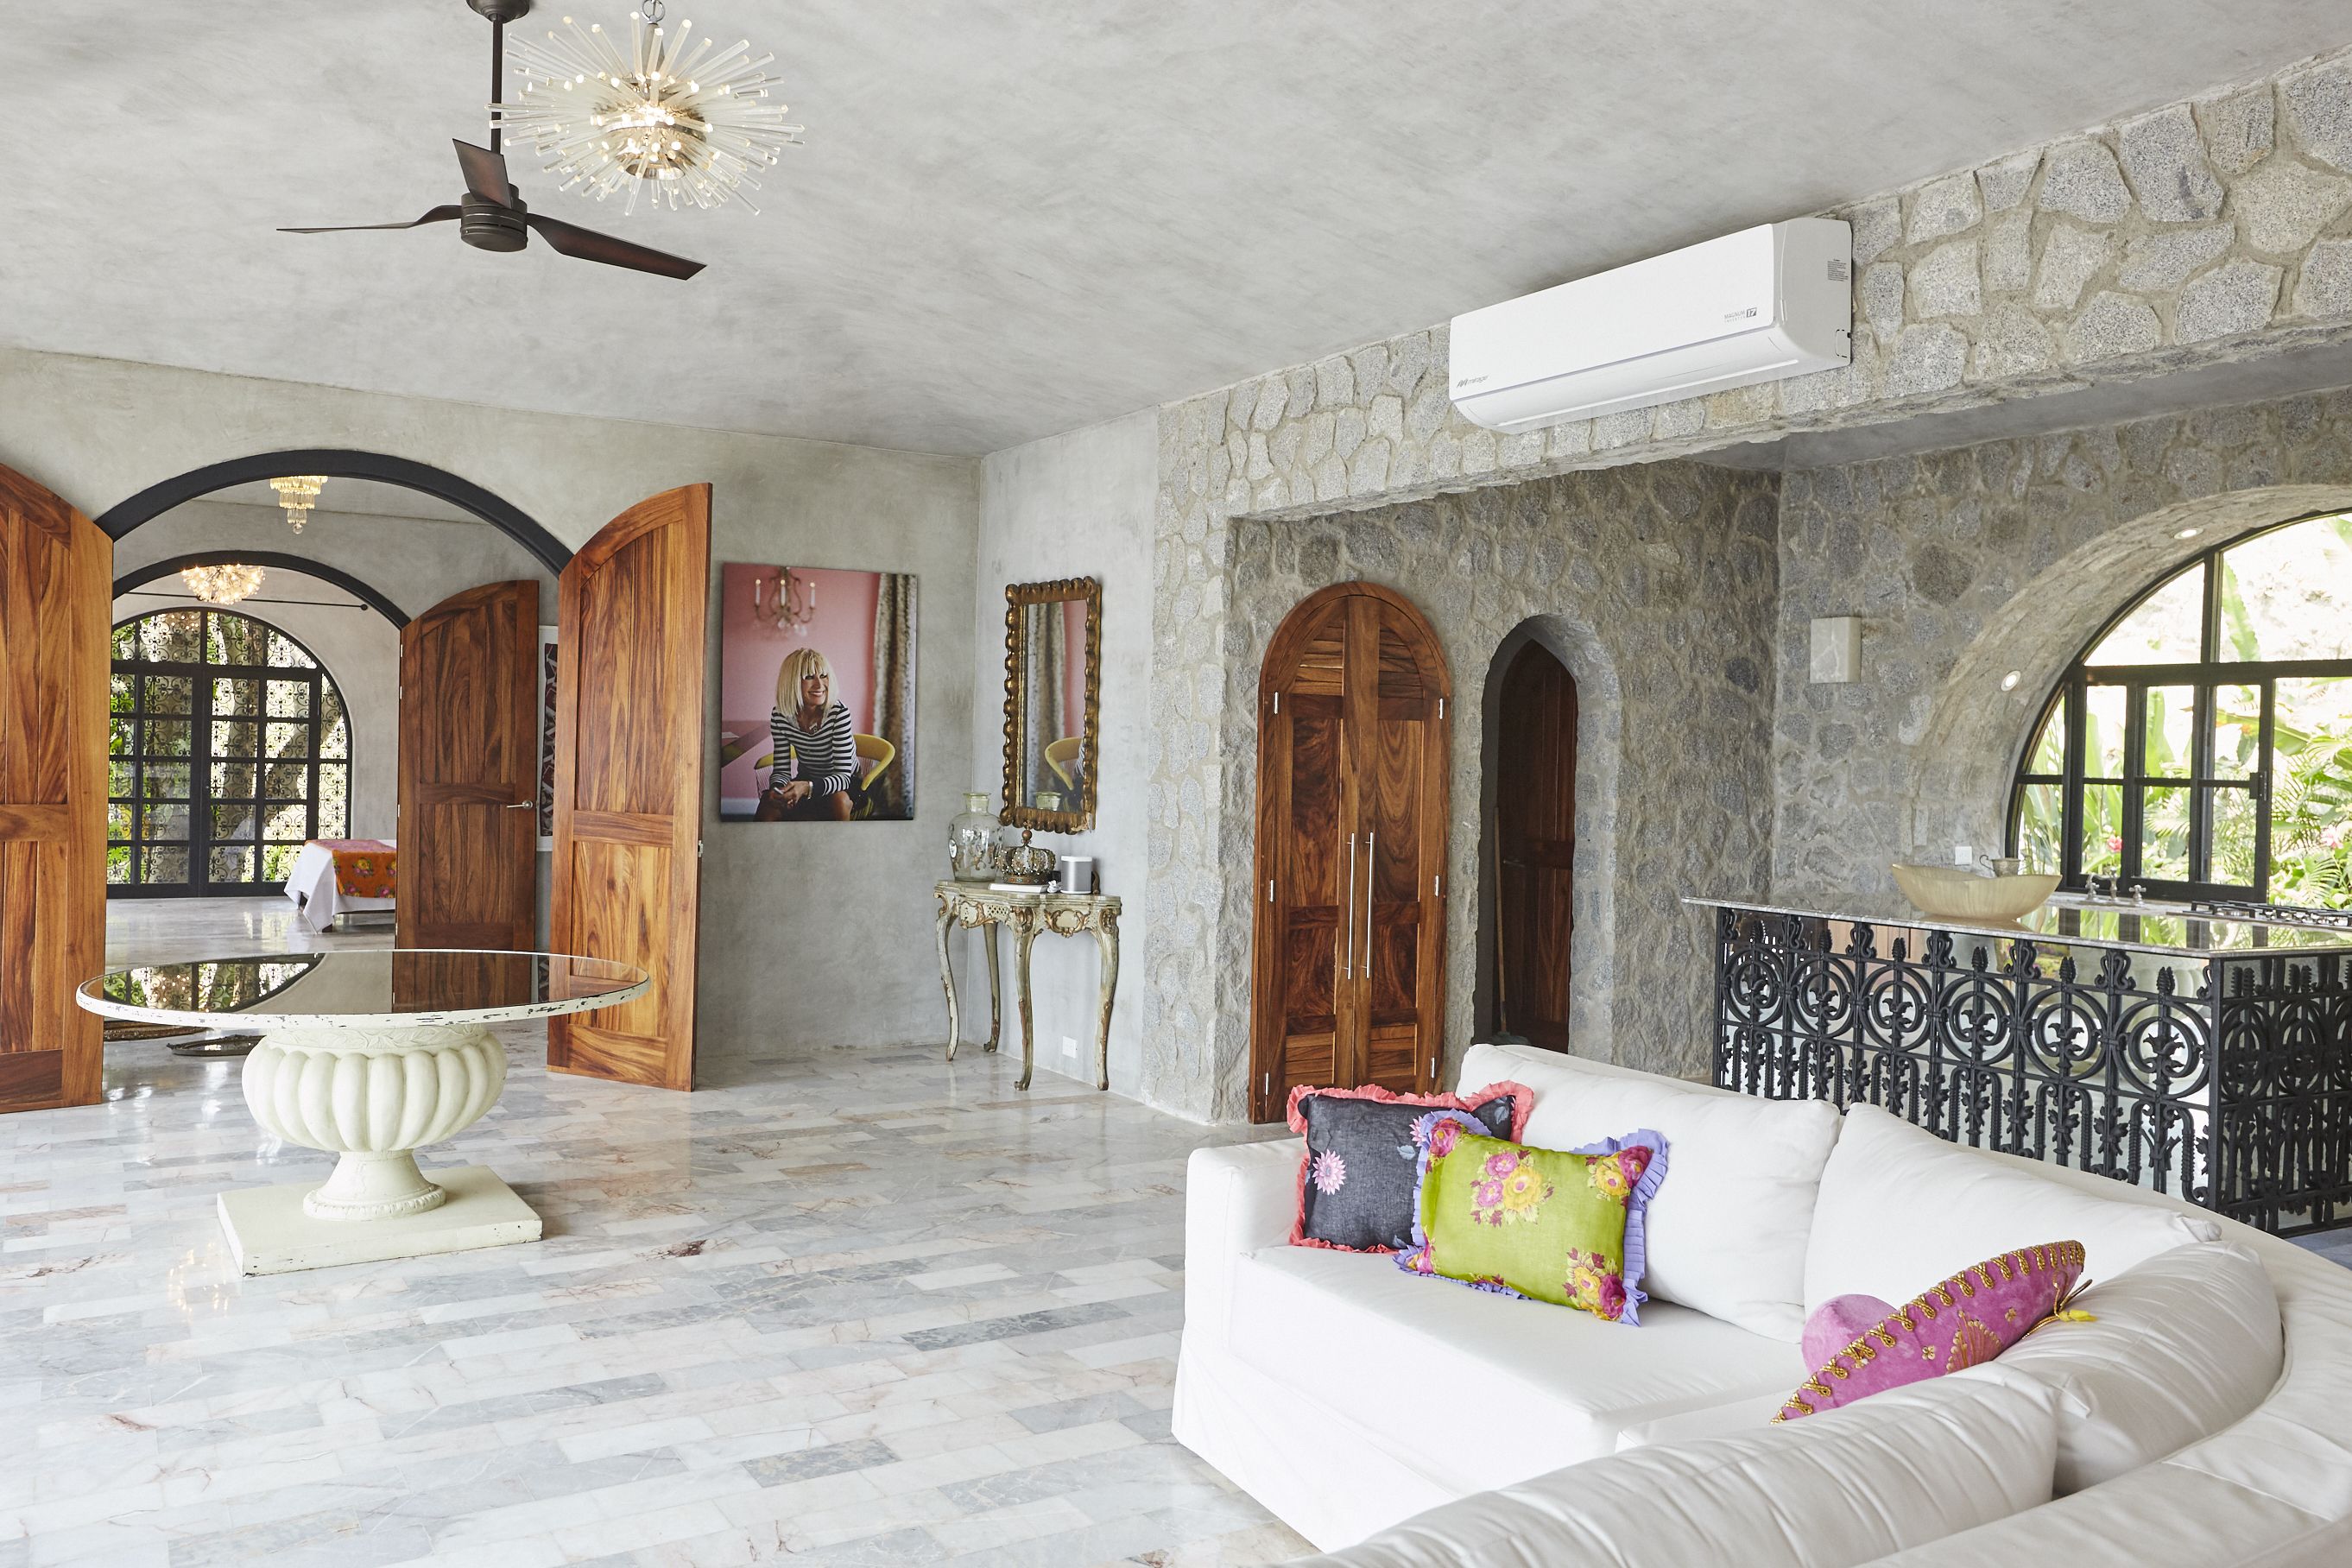 Stay At Betsey Johnson's Betseyvilla Airbnb In Mexico - Betsey